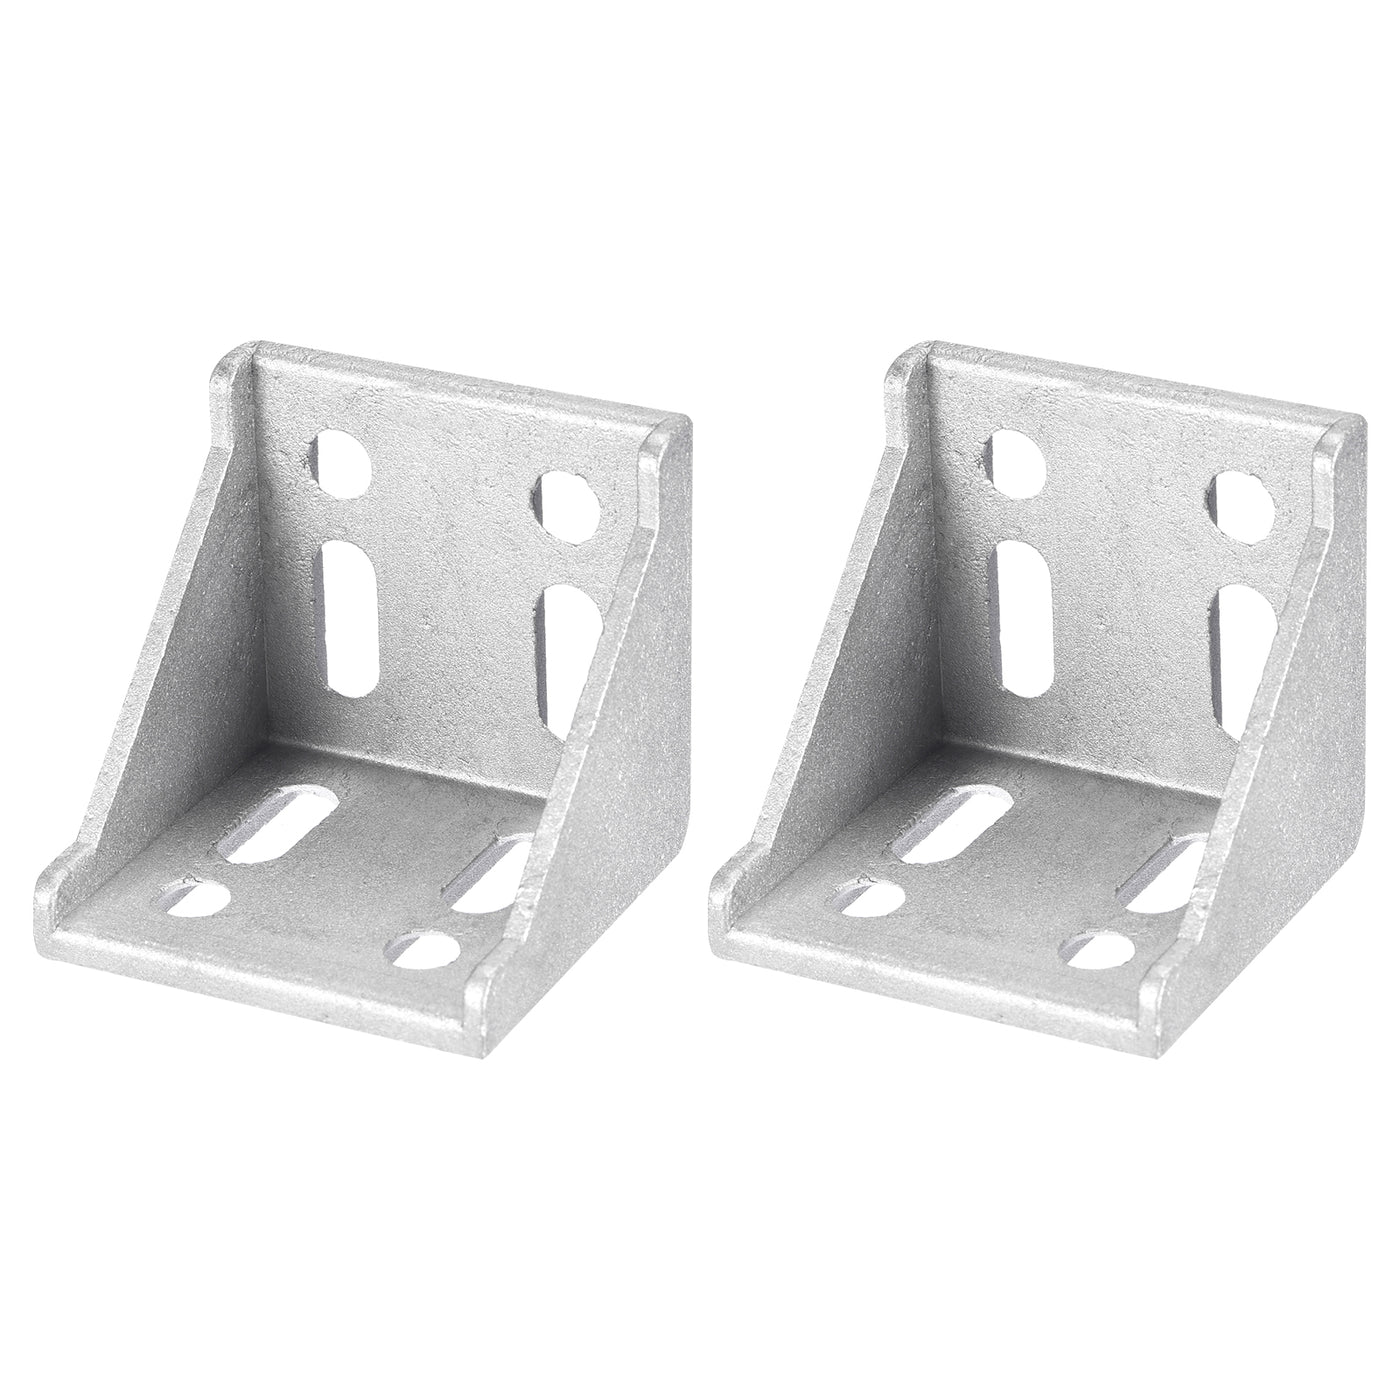 uxcell Uxcell 2Pcs Inside Corner Bracket Gusset, 57x57x59mm 6060 Angle Connectors for 3060/6060 Series Aluminum Extrusion Profile Silver